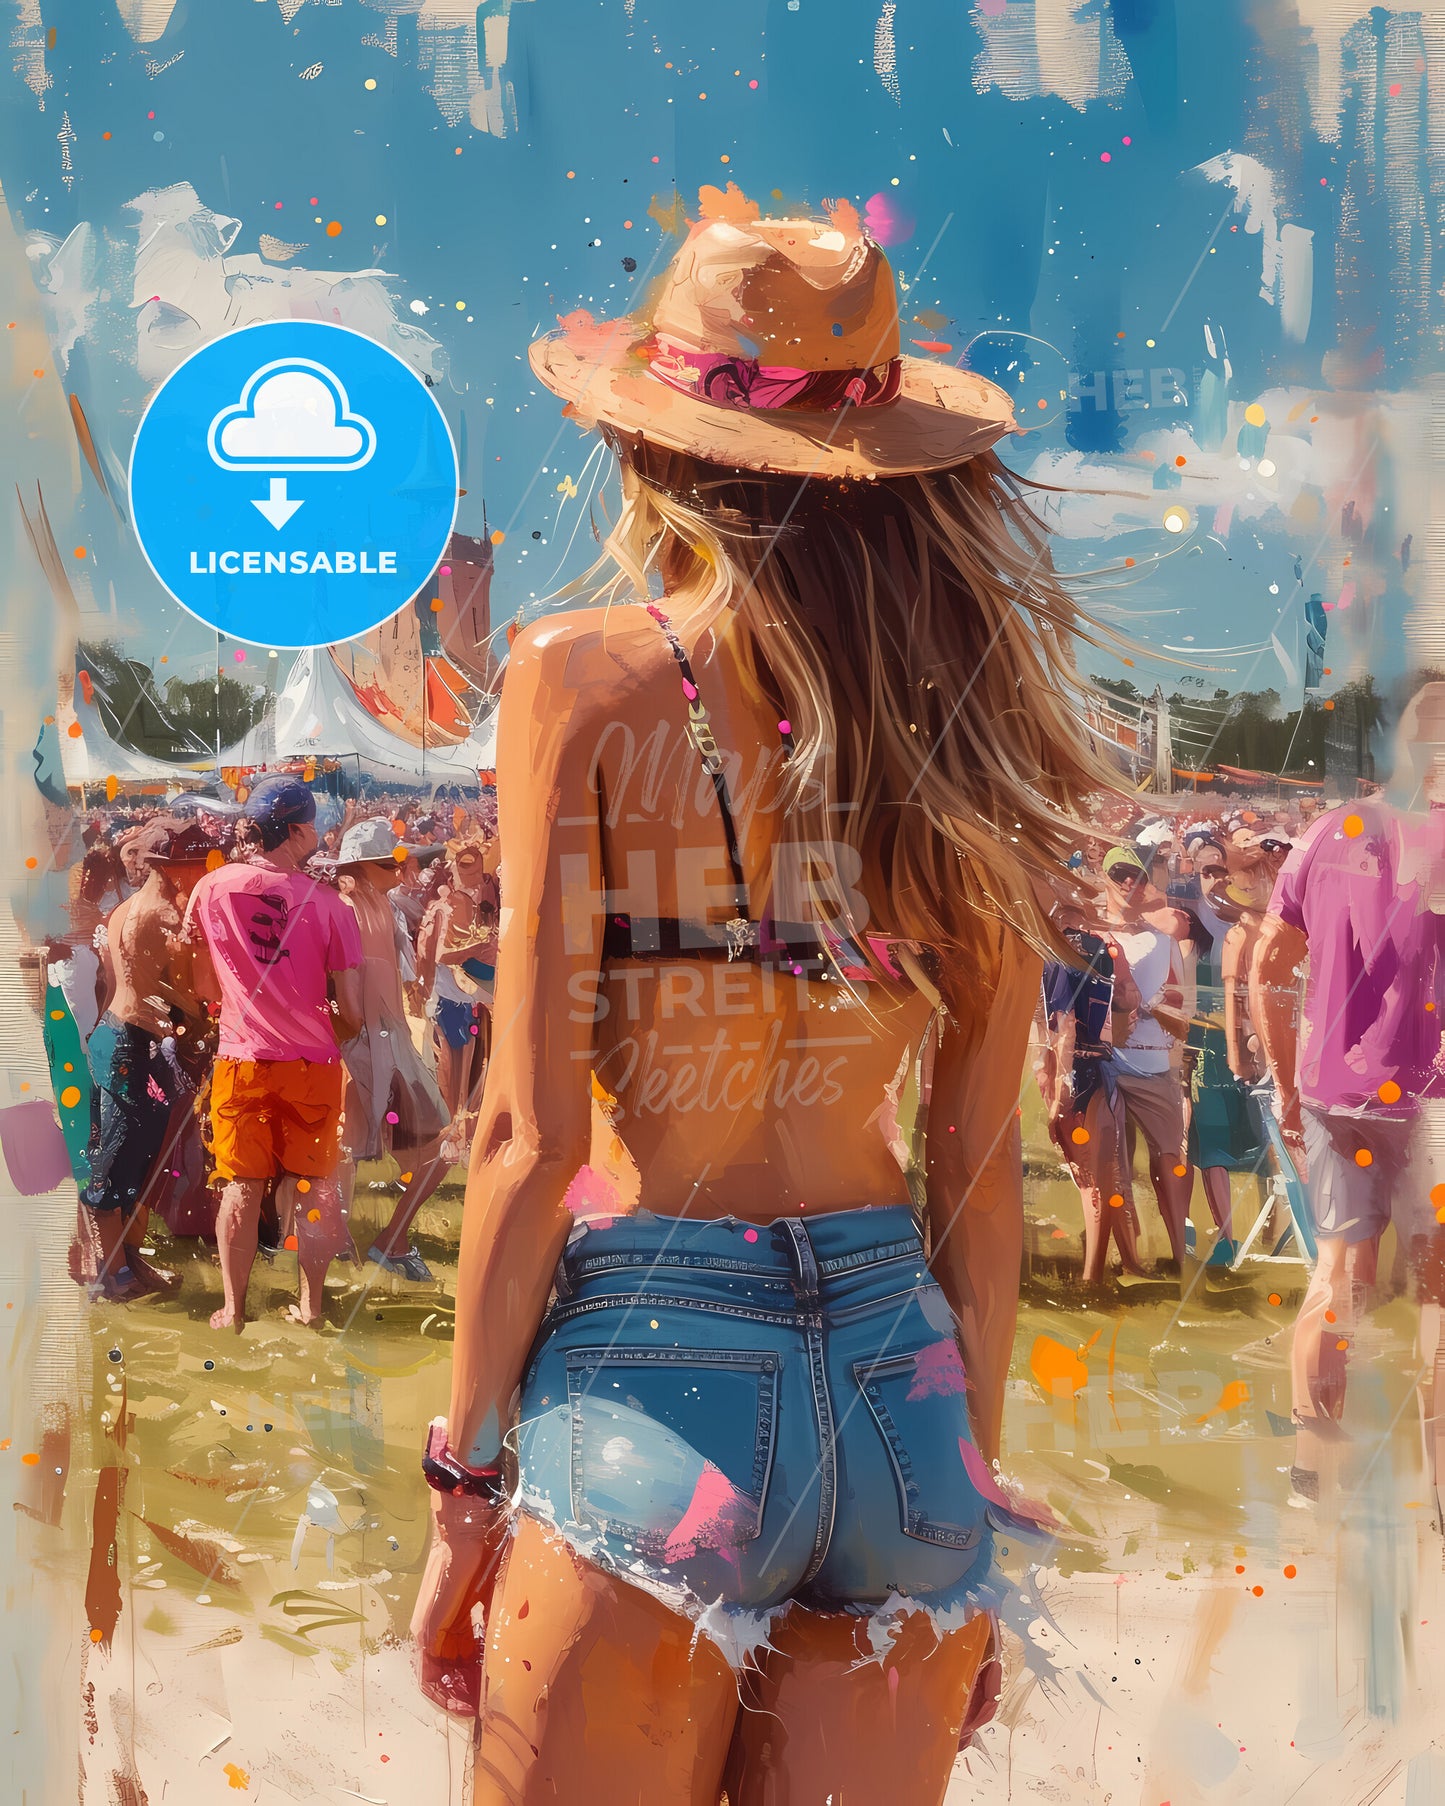 Latitude Festival - A Woman In A Hat And Shorts